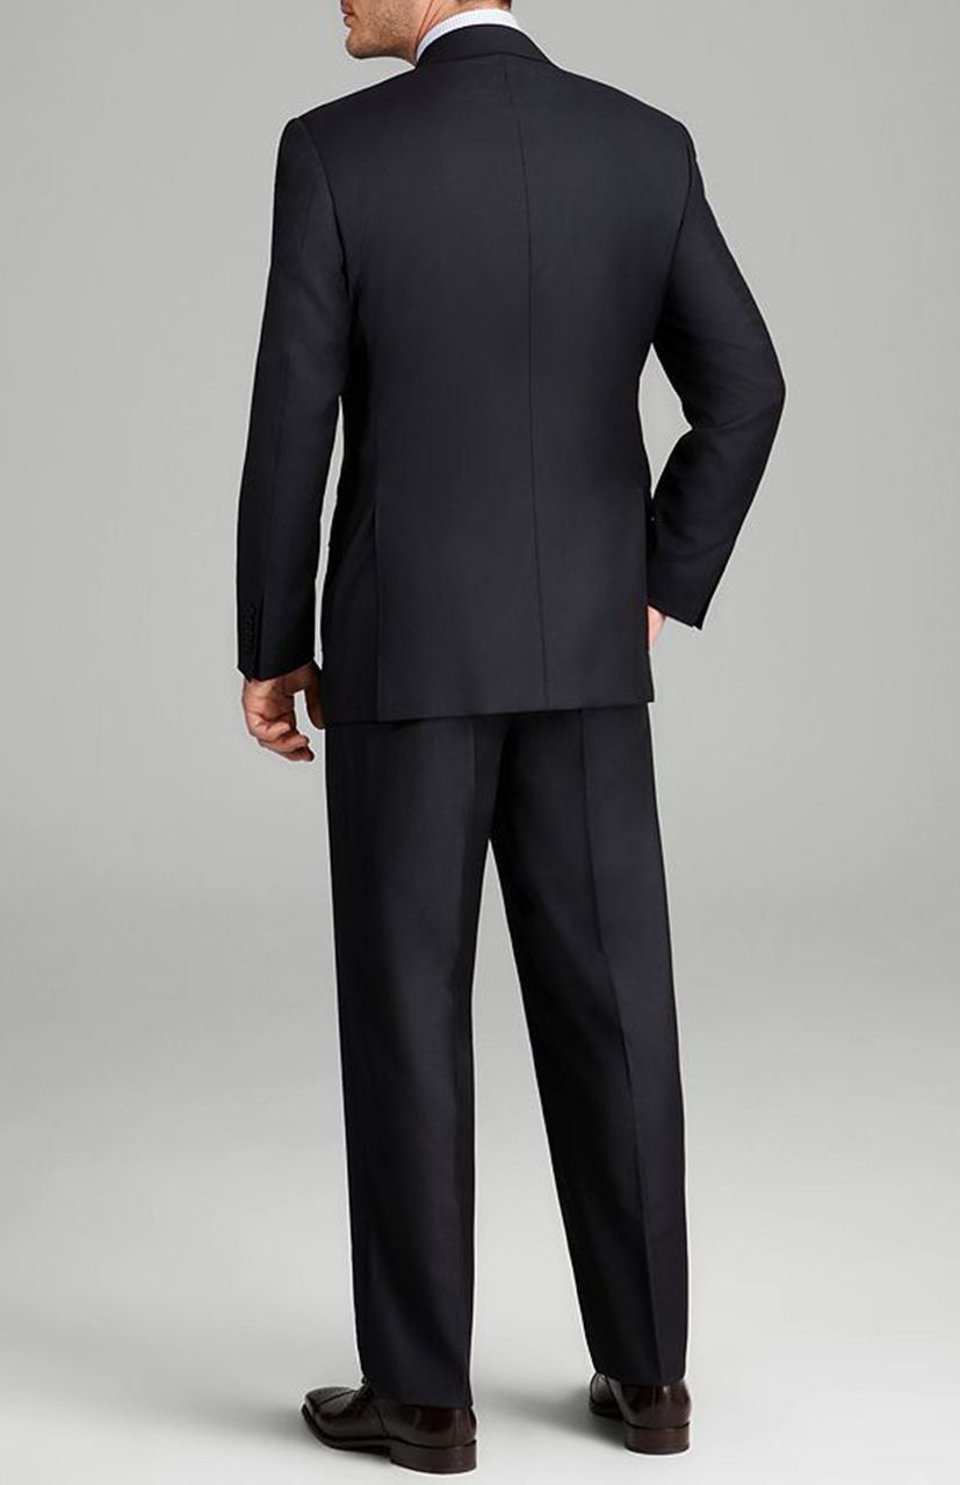 Canali Navy Suit